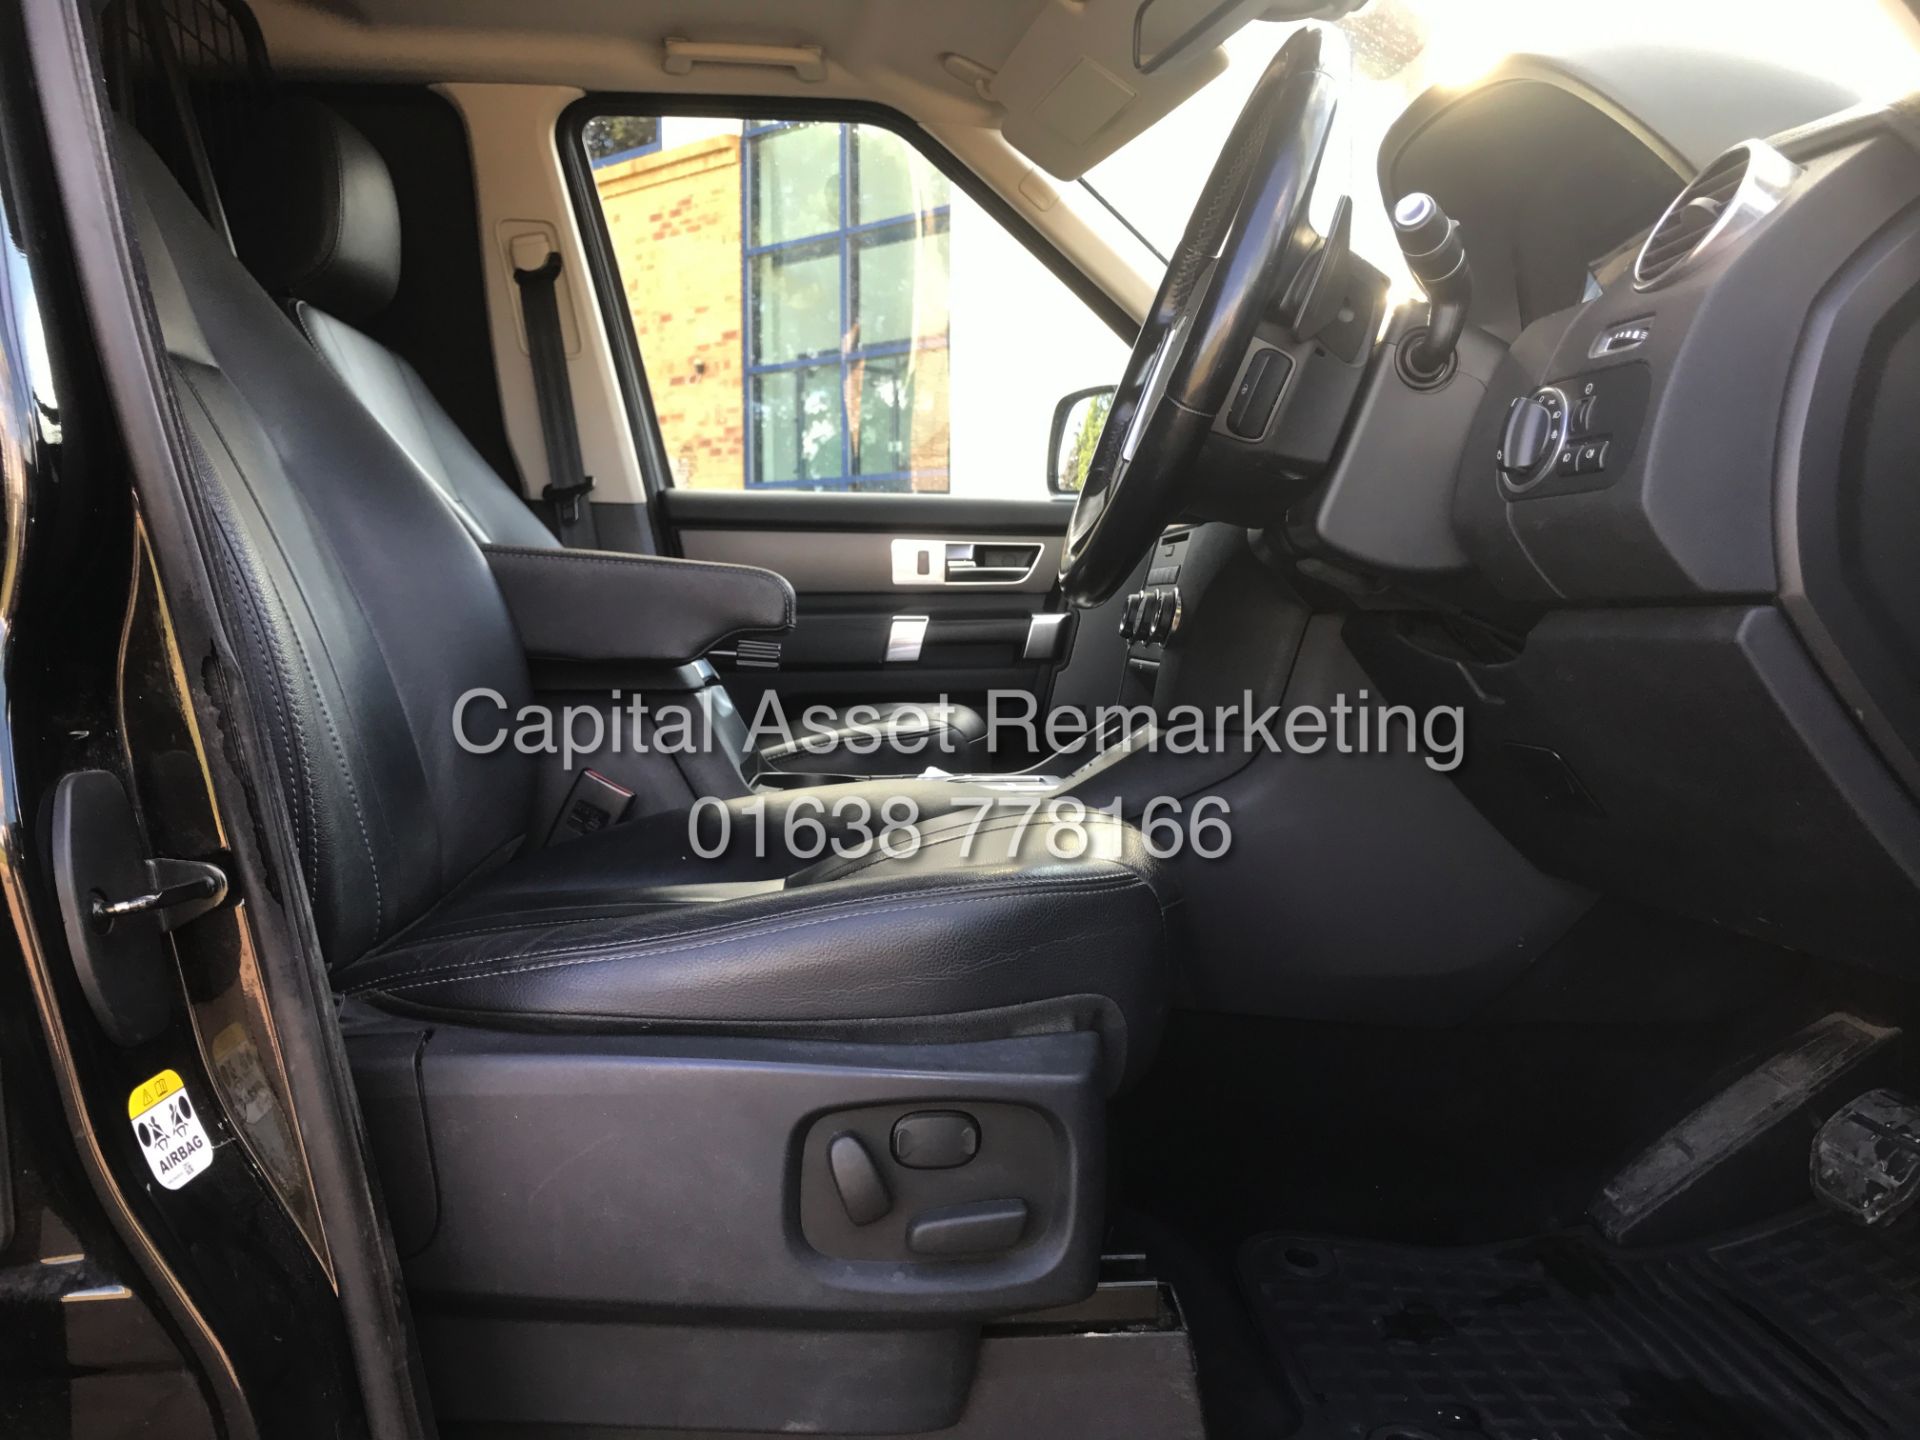 ON SALE LAND ROVER DISCOVERY 4 "3.0SDV6 - AUTO"COMMERCIAL (2014 MODEL) HUGE SPEC - SAT NAV -LEATHER - Image 16 of 31